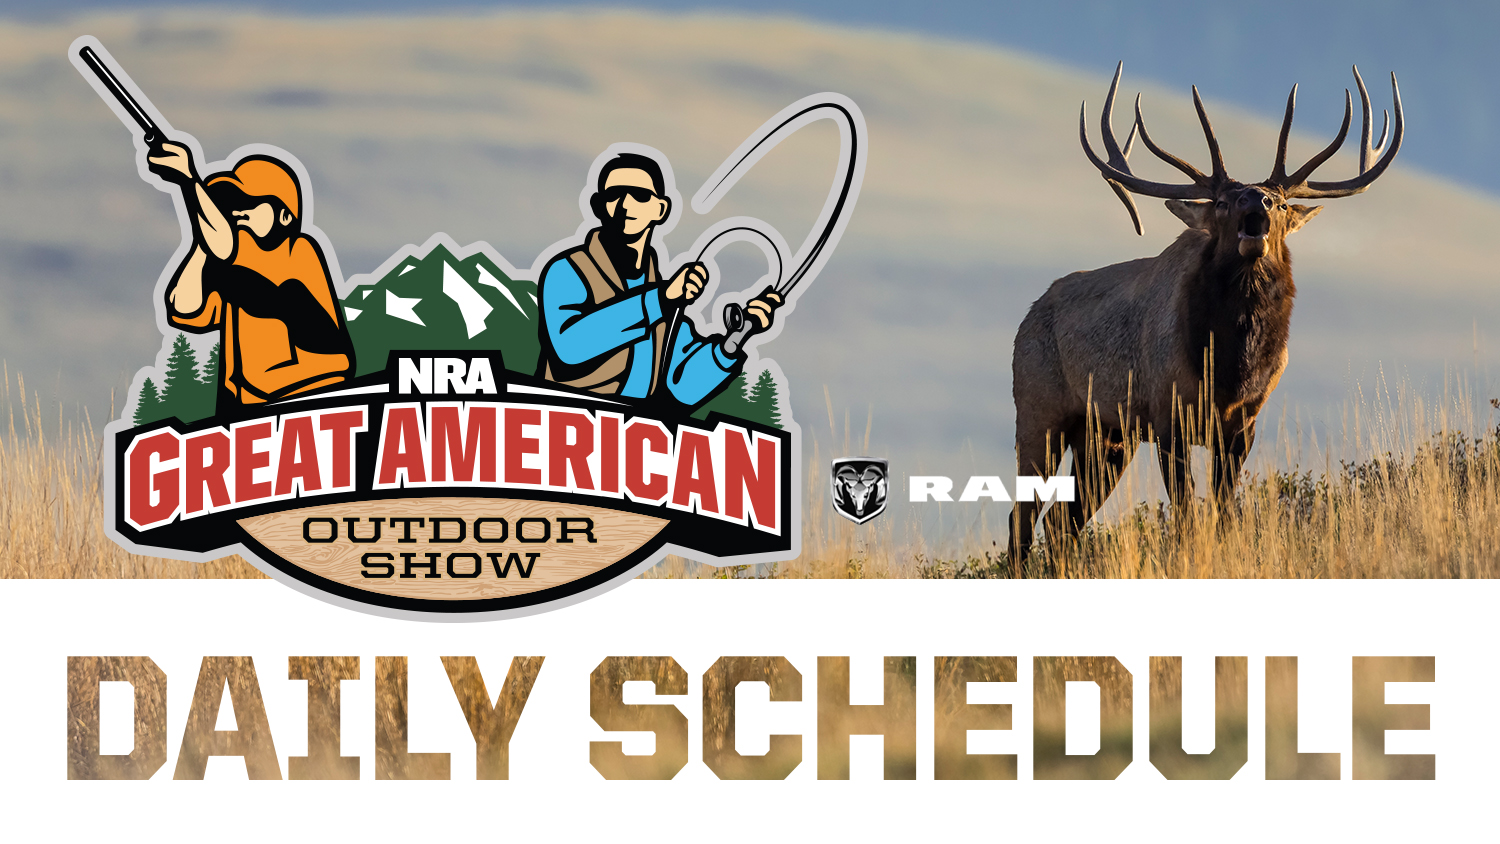 2019 Great American Outdoor Show Daily Schedule - Saturday, February 9